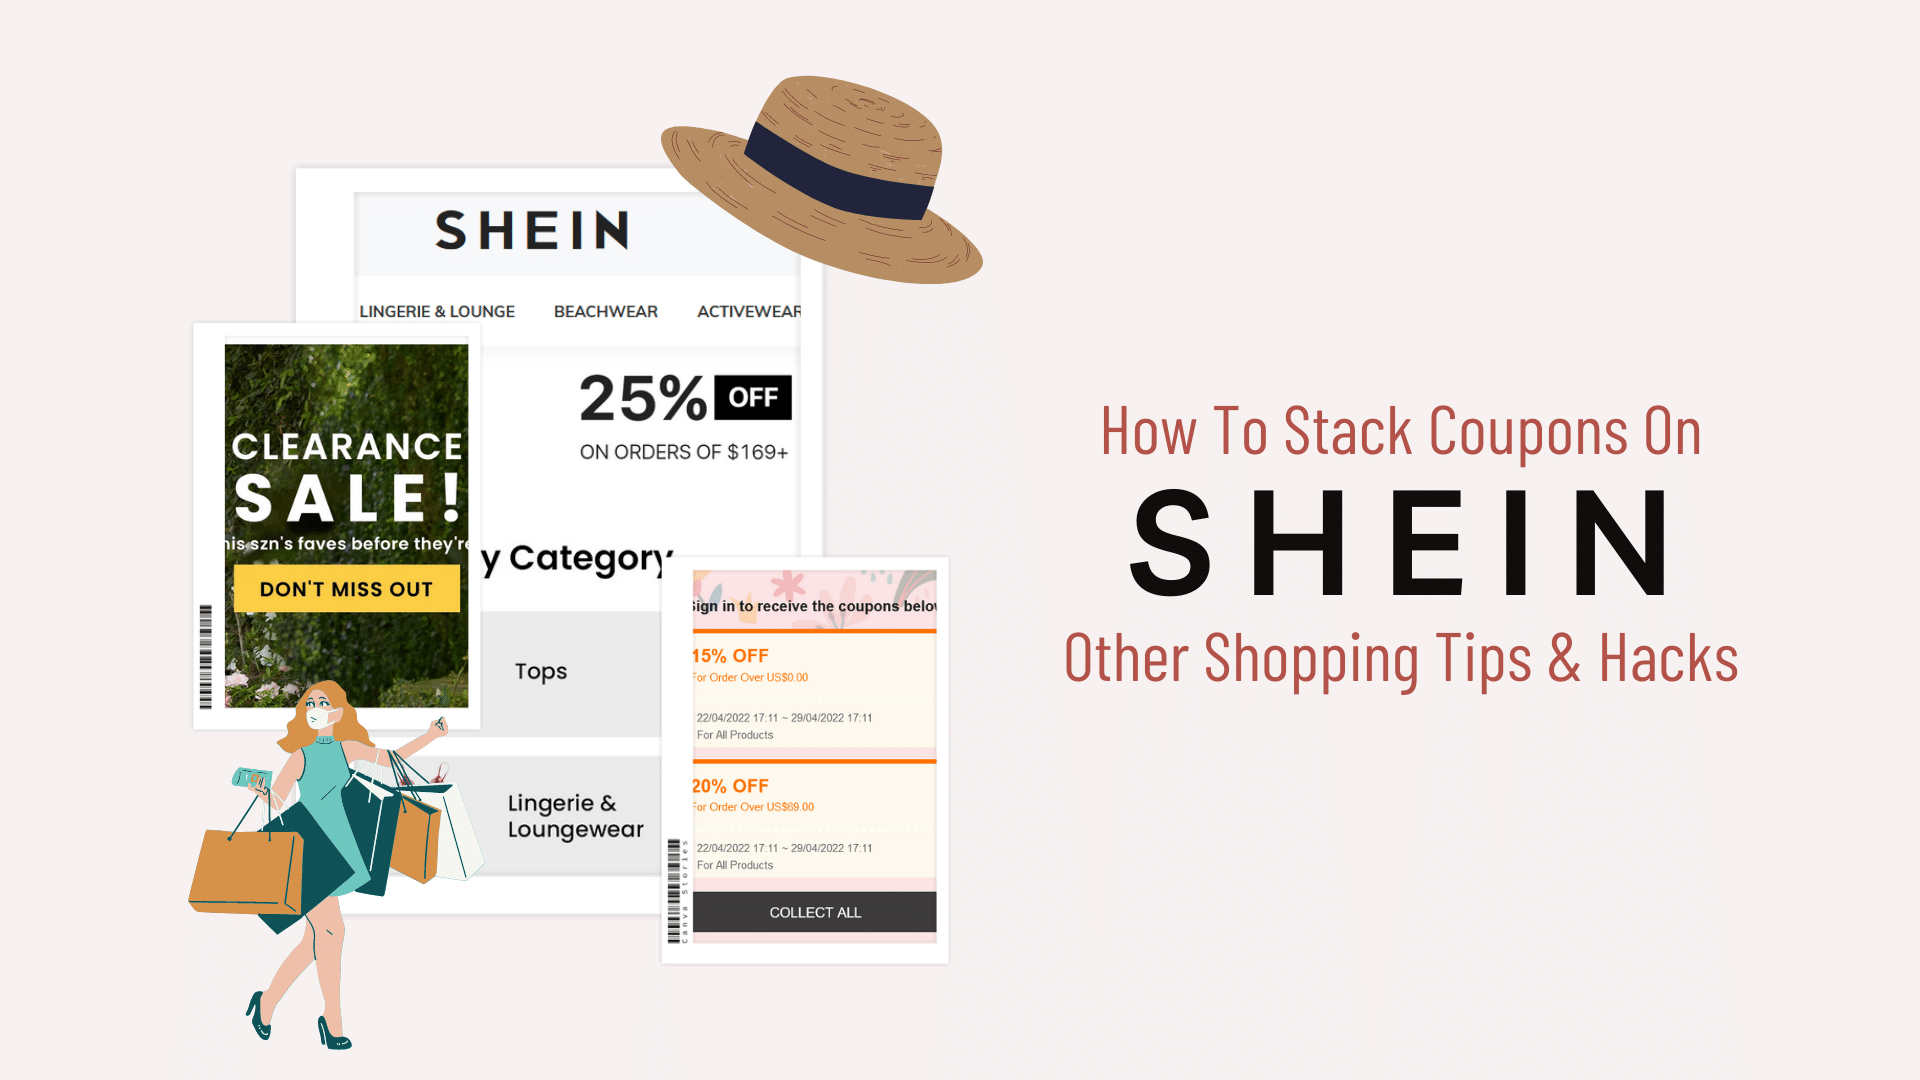 SHEIN Bags Sale Extra 15% Off